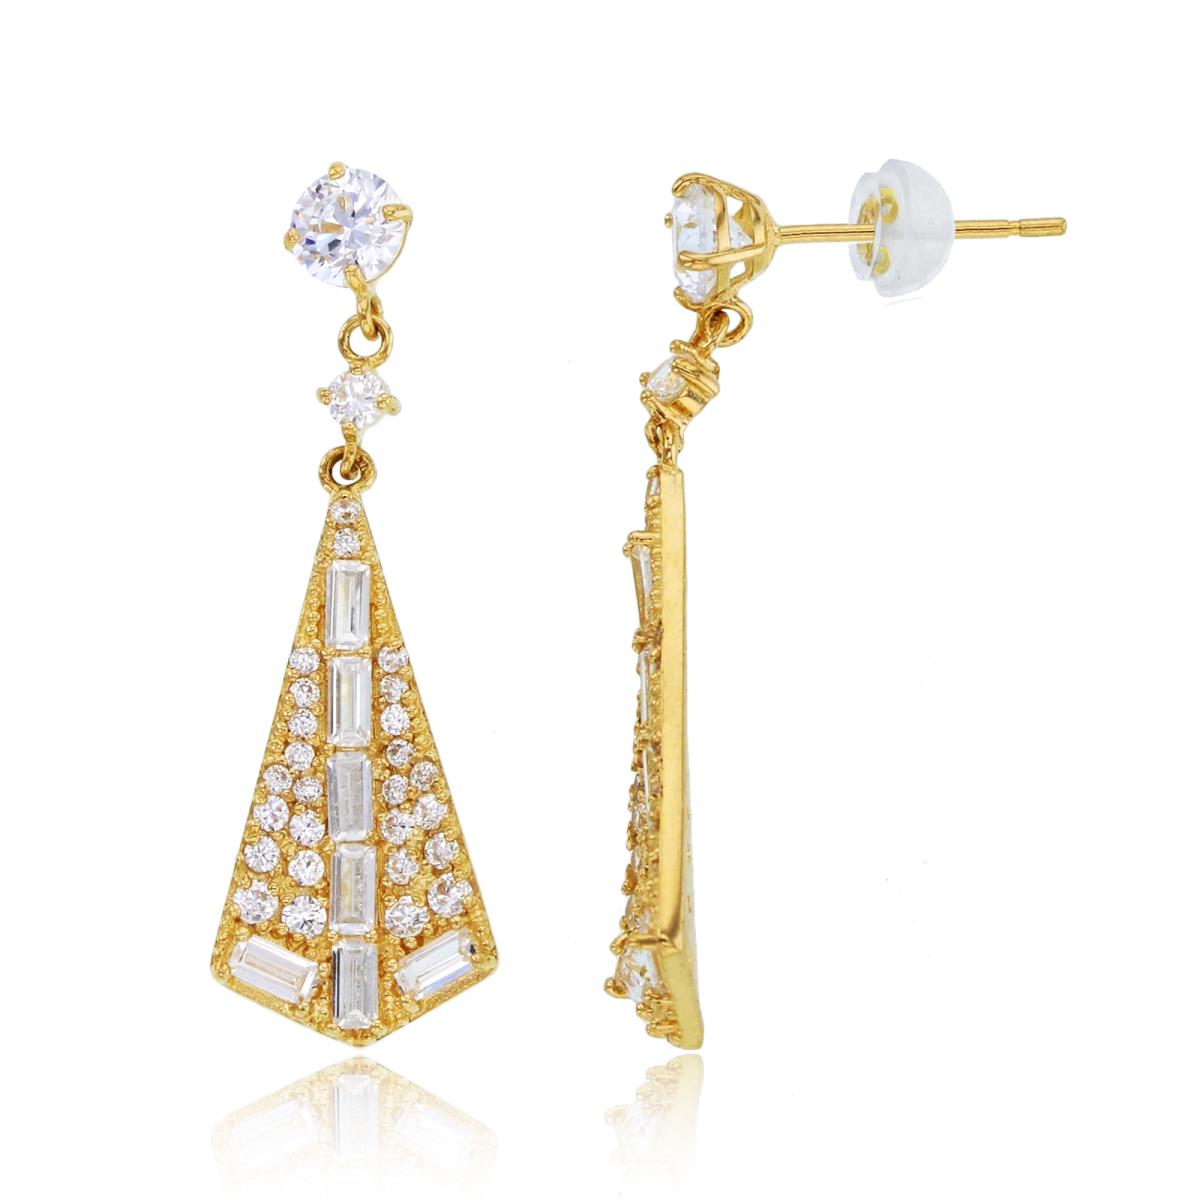 10K Yellow Gold Rnd & SB CZ Chandelier Earrings with Silicon Backs